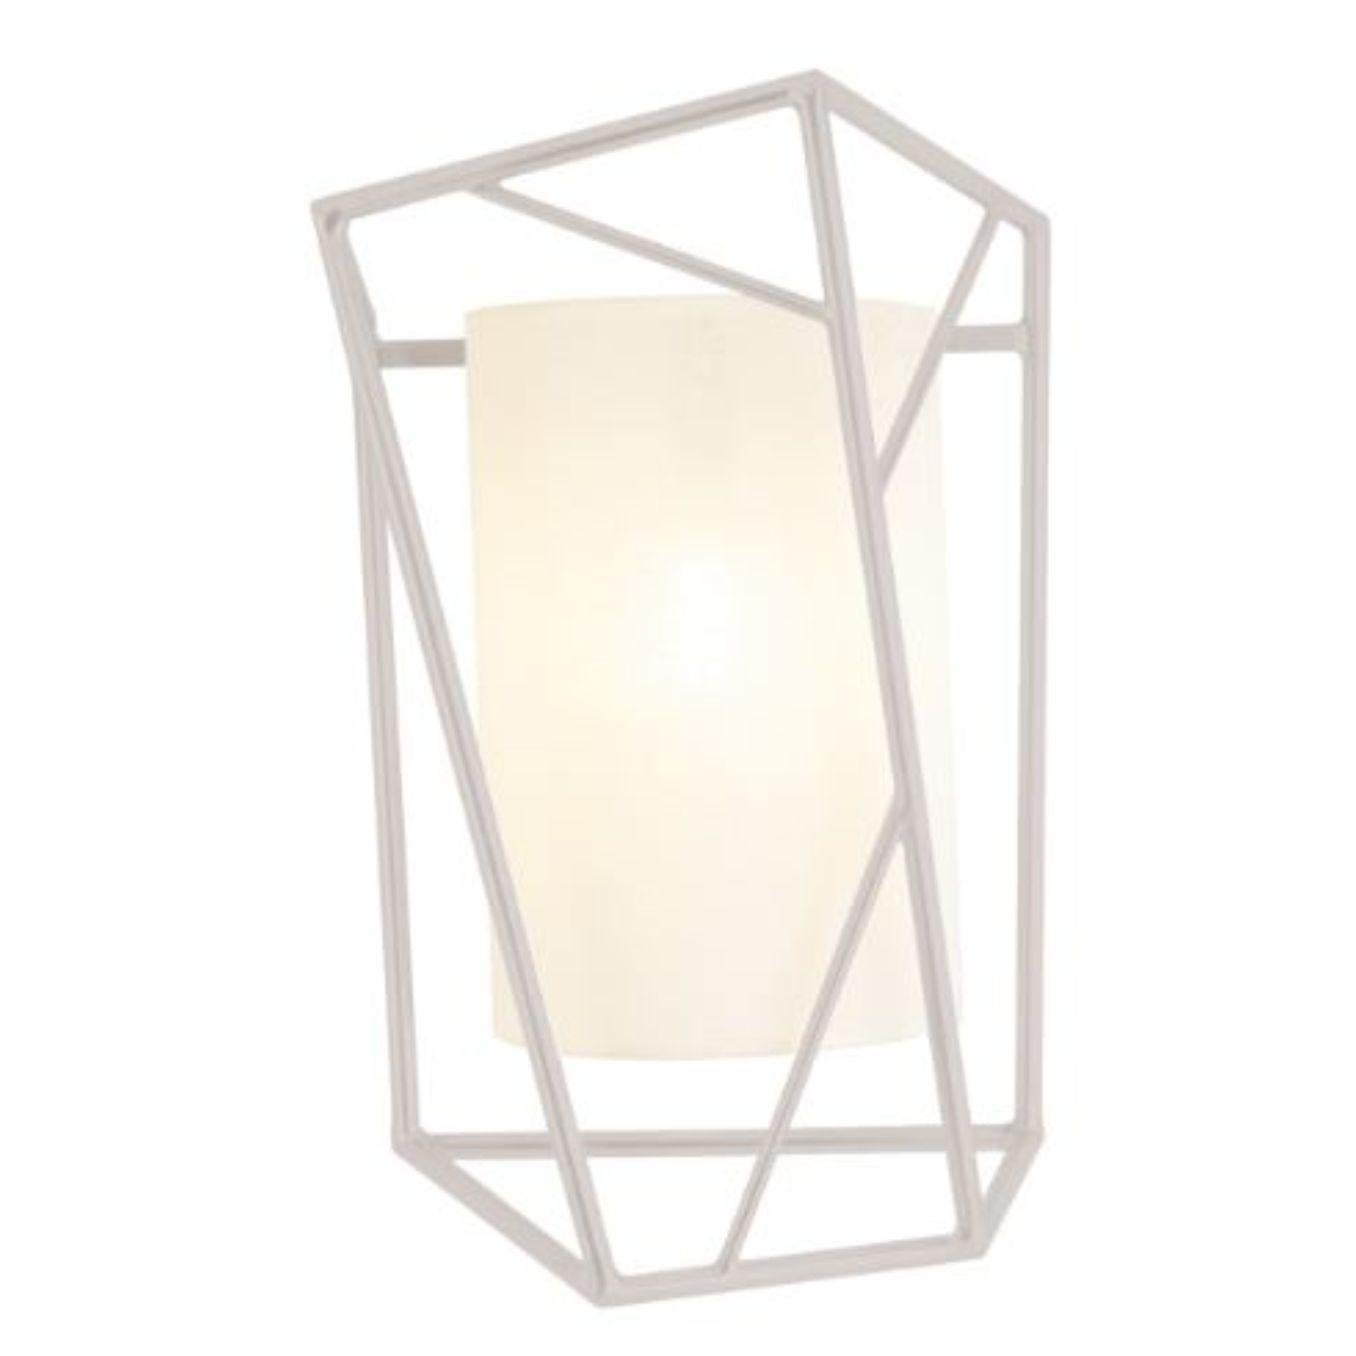 Taupe Star wall lamp by Dooq
Dimensions: W 28 x D 20 x H 51 cm
Materials: lacquered metal, polished or satin metal.
abat-jour: linen
Also available in different colors and materials.

Information:
230V/50Hz
E14/1x15W LED
120V/60Hz
E12/1x10W LED
bulb